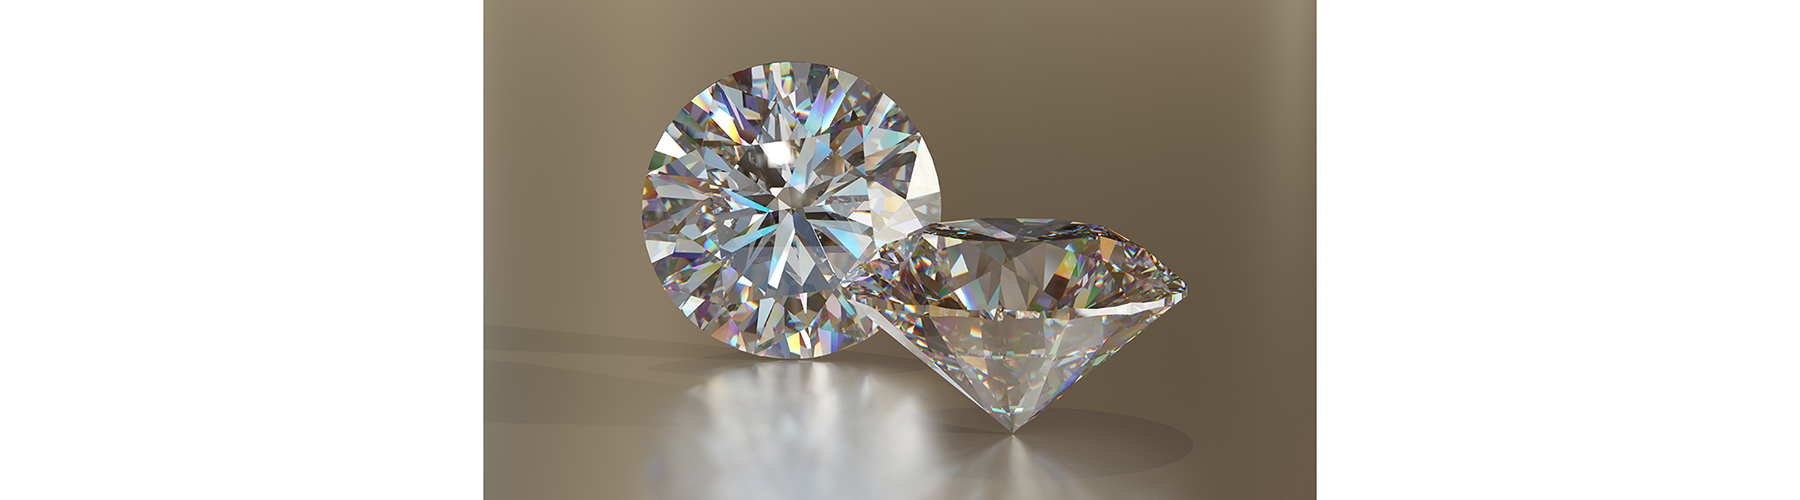 Are Lab-Grown Diamonds Real? Photo of two round diamonds: one lab-grown, one natural.